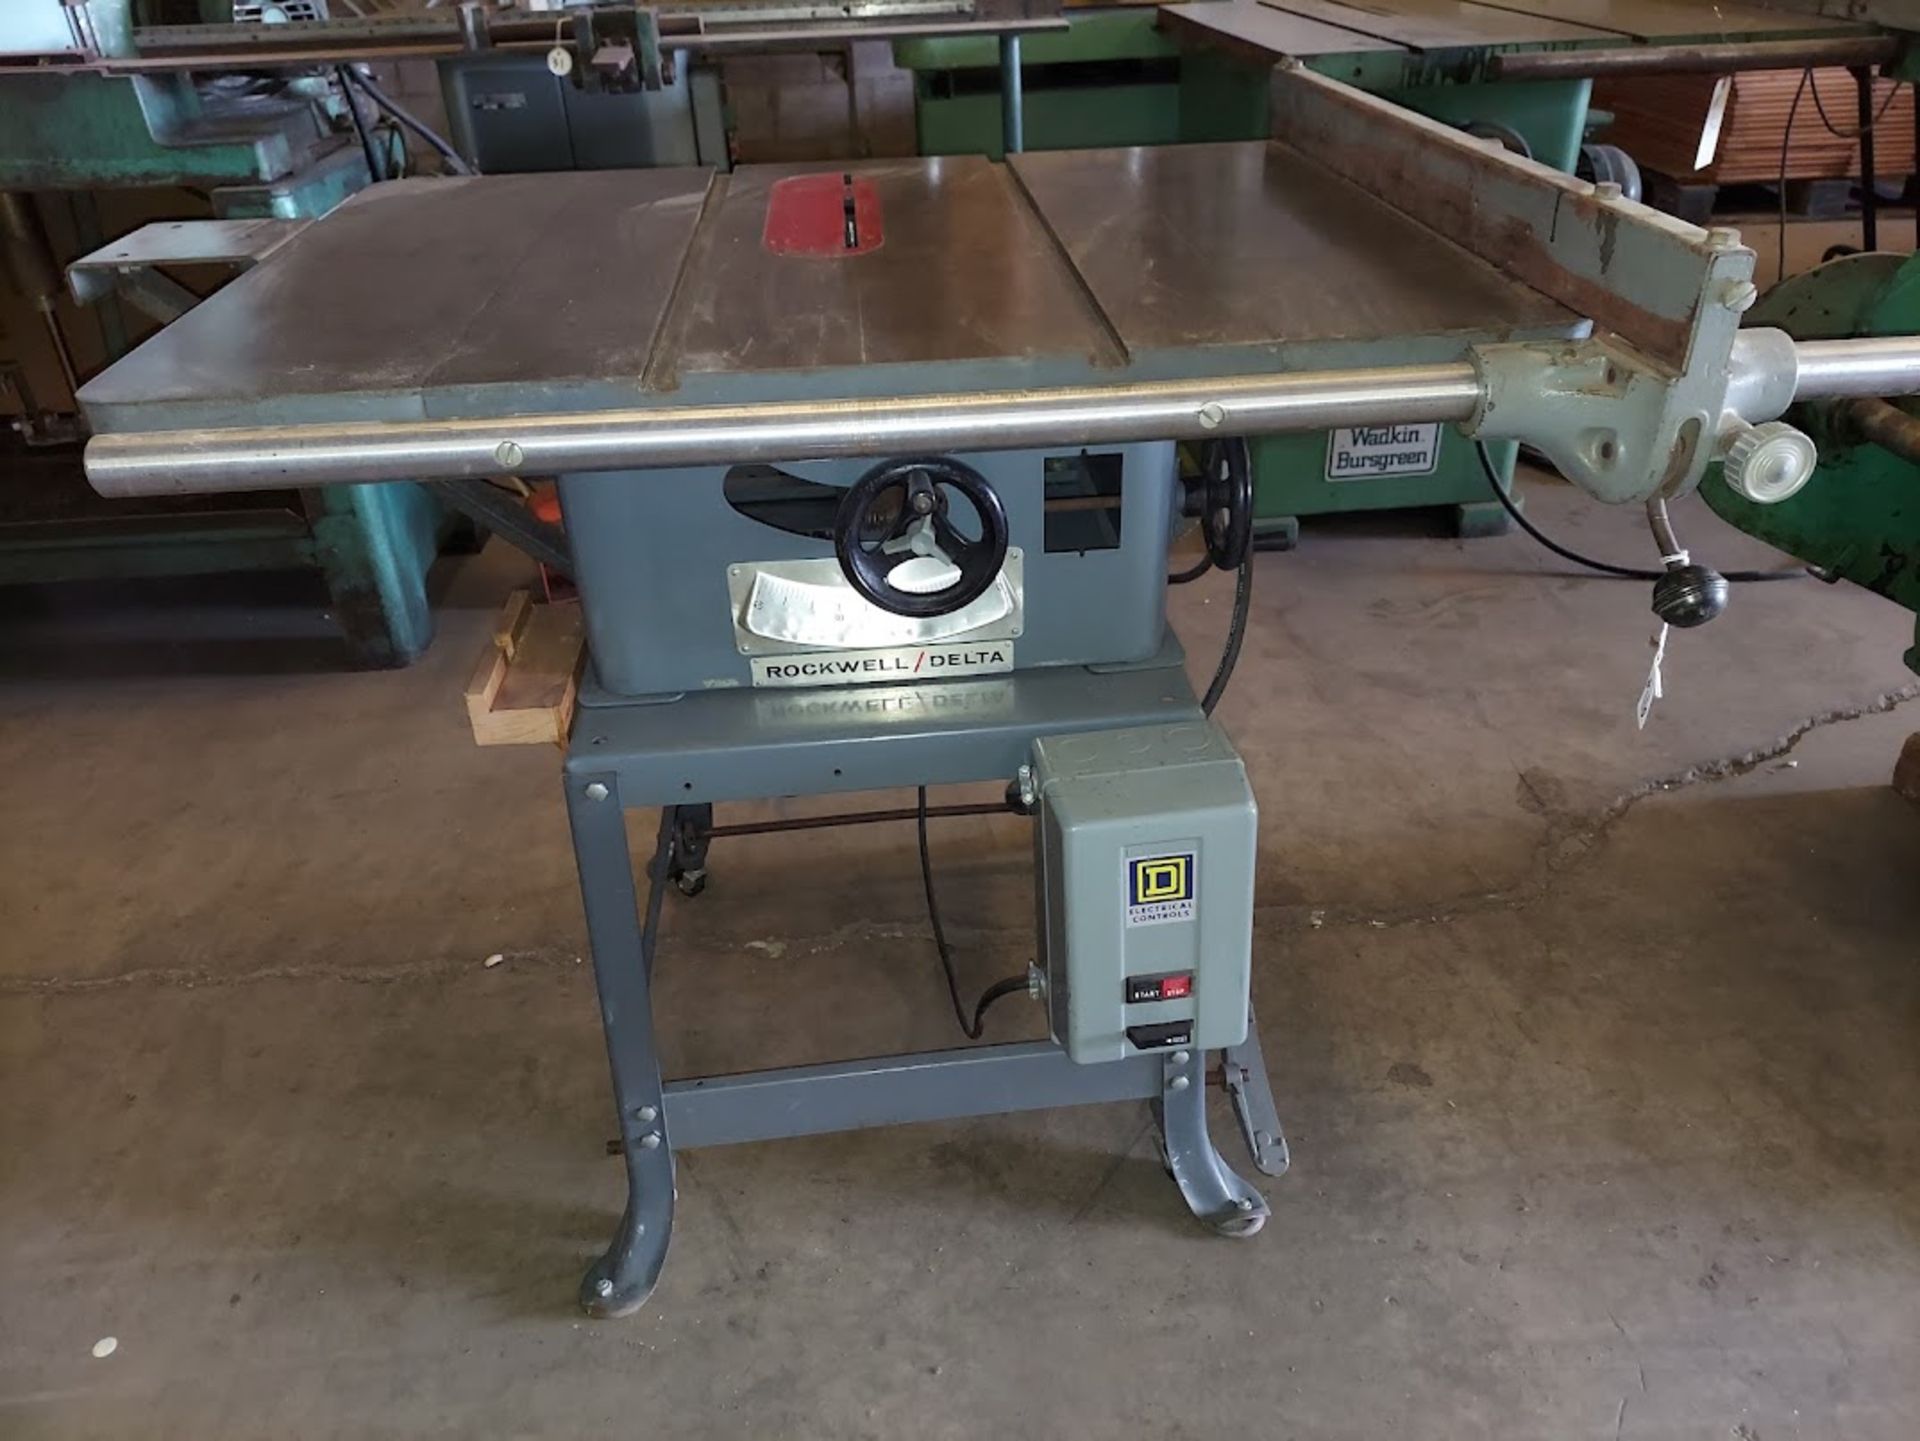 Rockwell / Delta 10" Contractors Table Saw, 1 hp, 115/230 volts 1ph